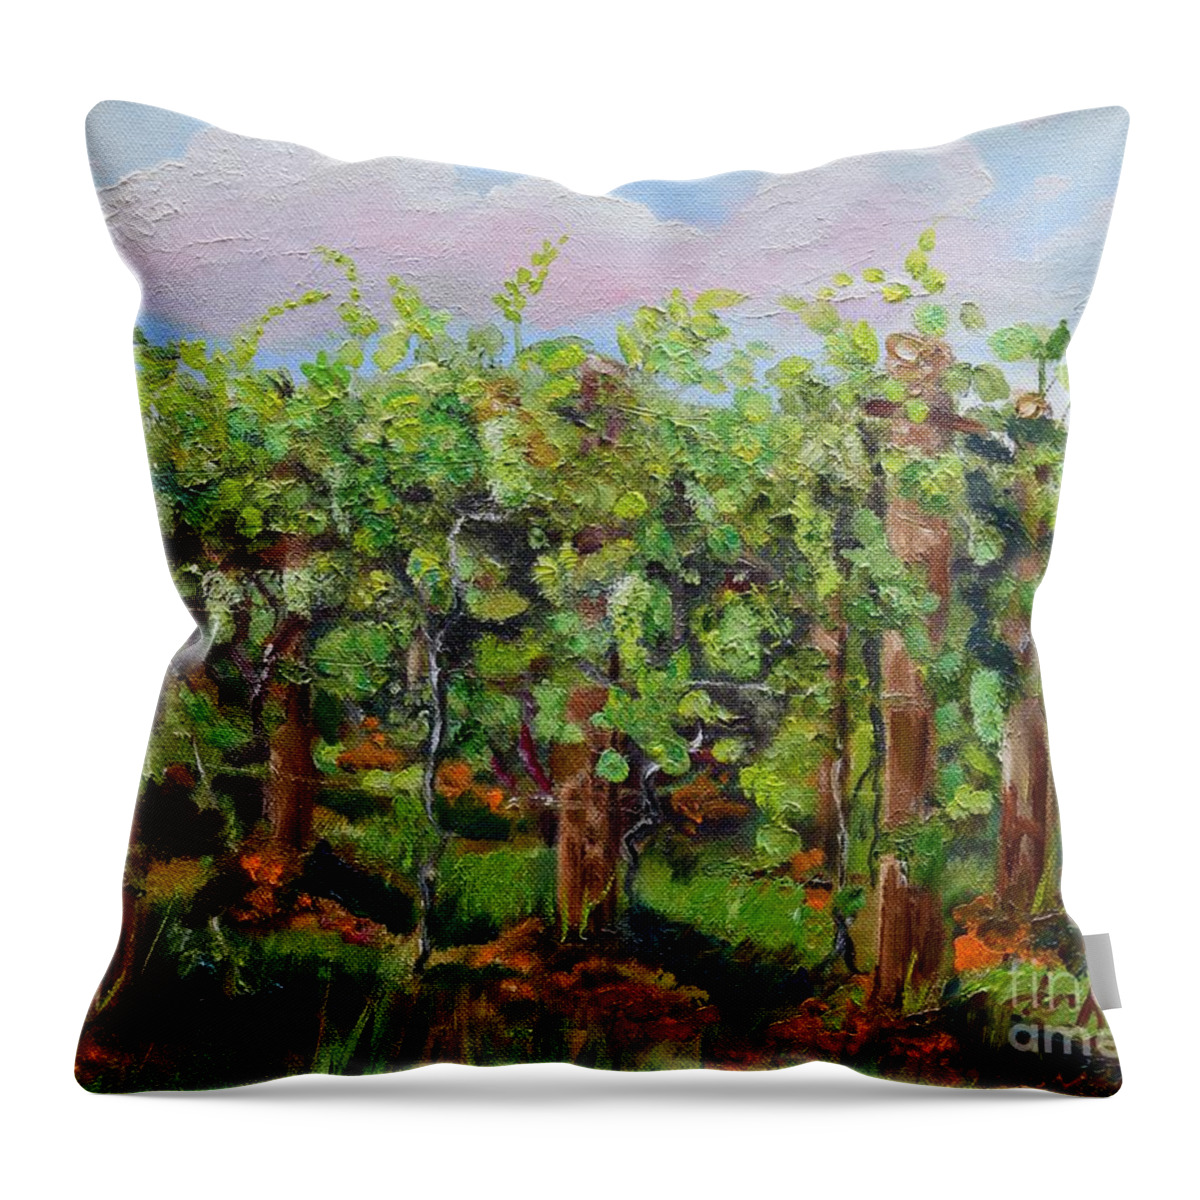 Plein Air Painting Throw Pillow featuring the painting Vineyard of Chateau Meichtry - Ellijay GA - Plein Air Painting by Jan Dappen